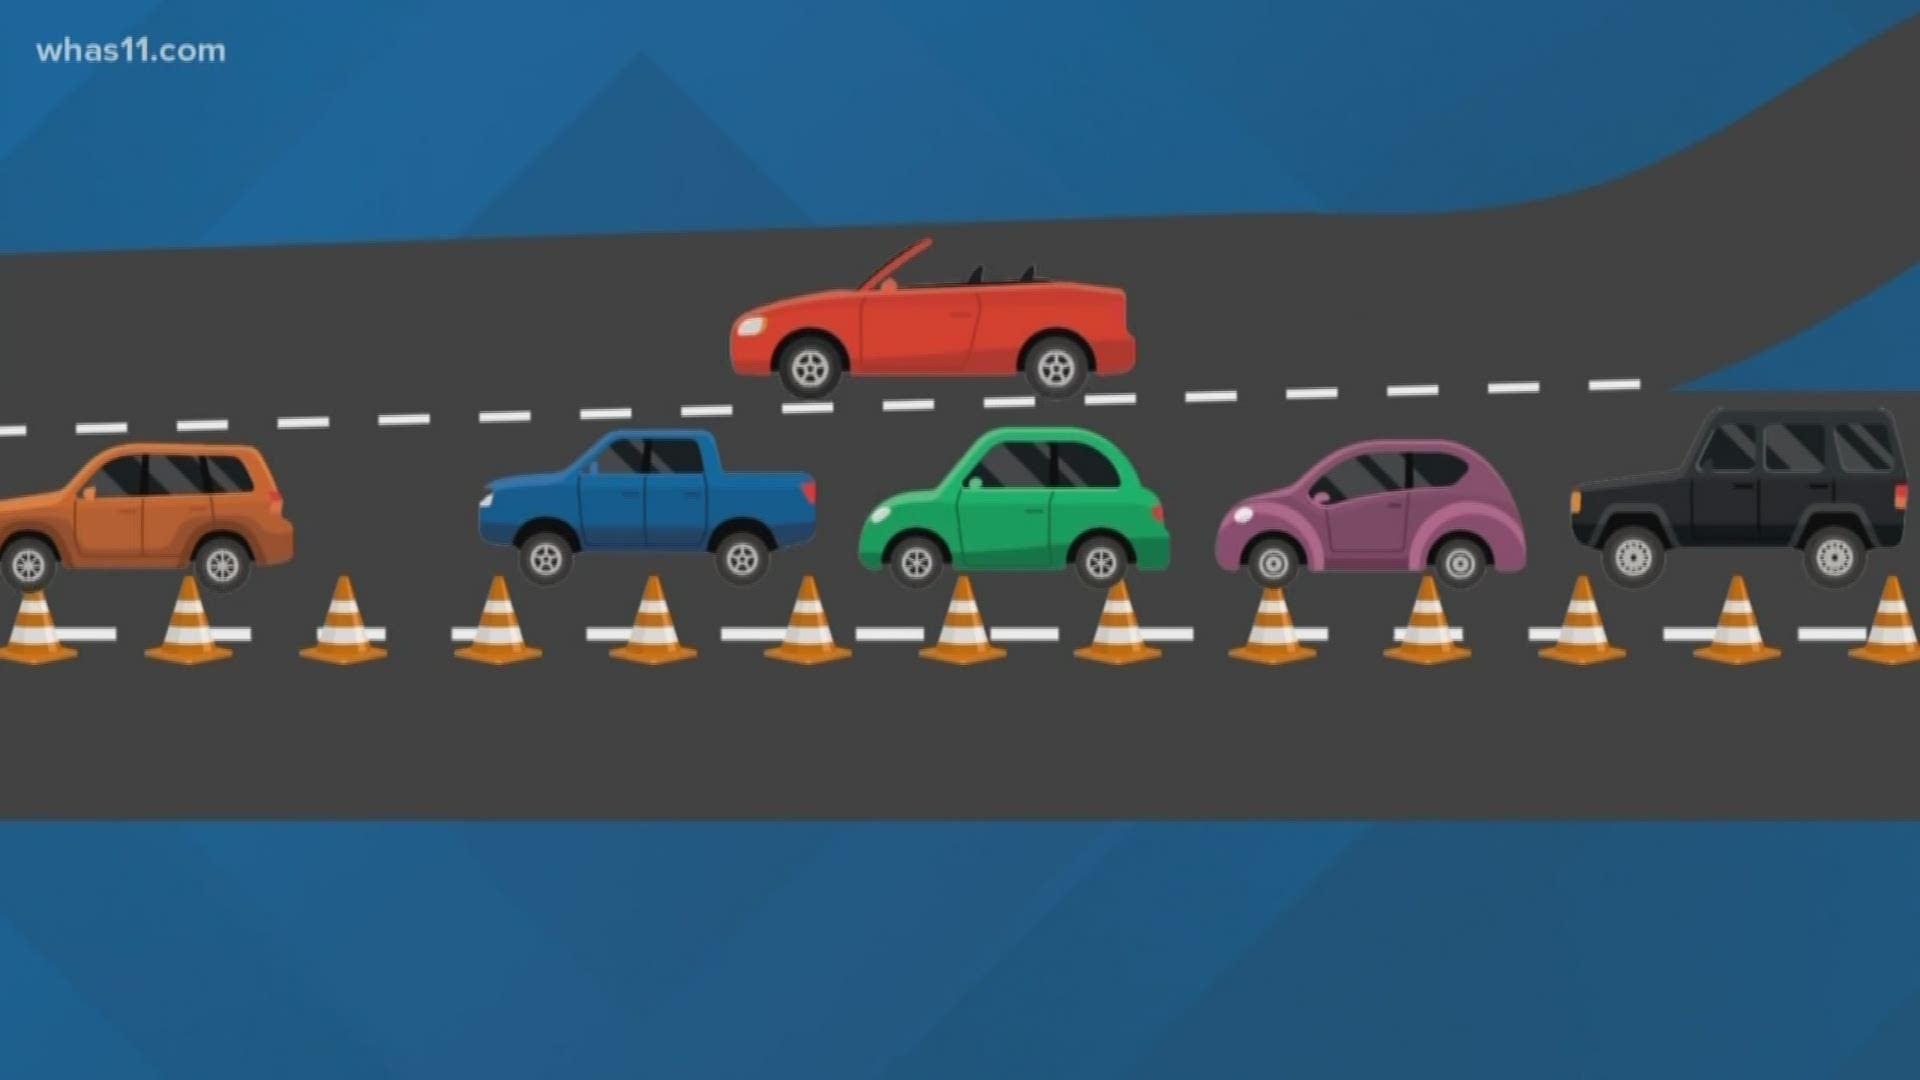 Several states are encouraging drivers to zipper merge during traffic as a way to save everyone's time, but many people say they'd rather be courteous than efficient.